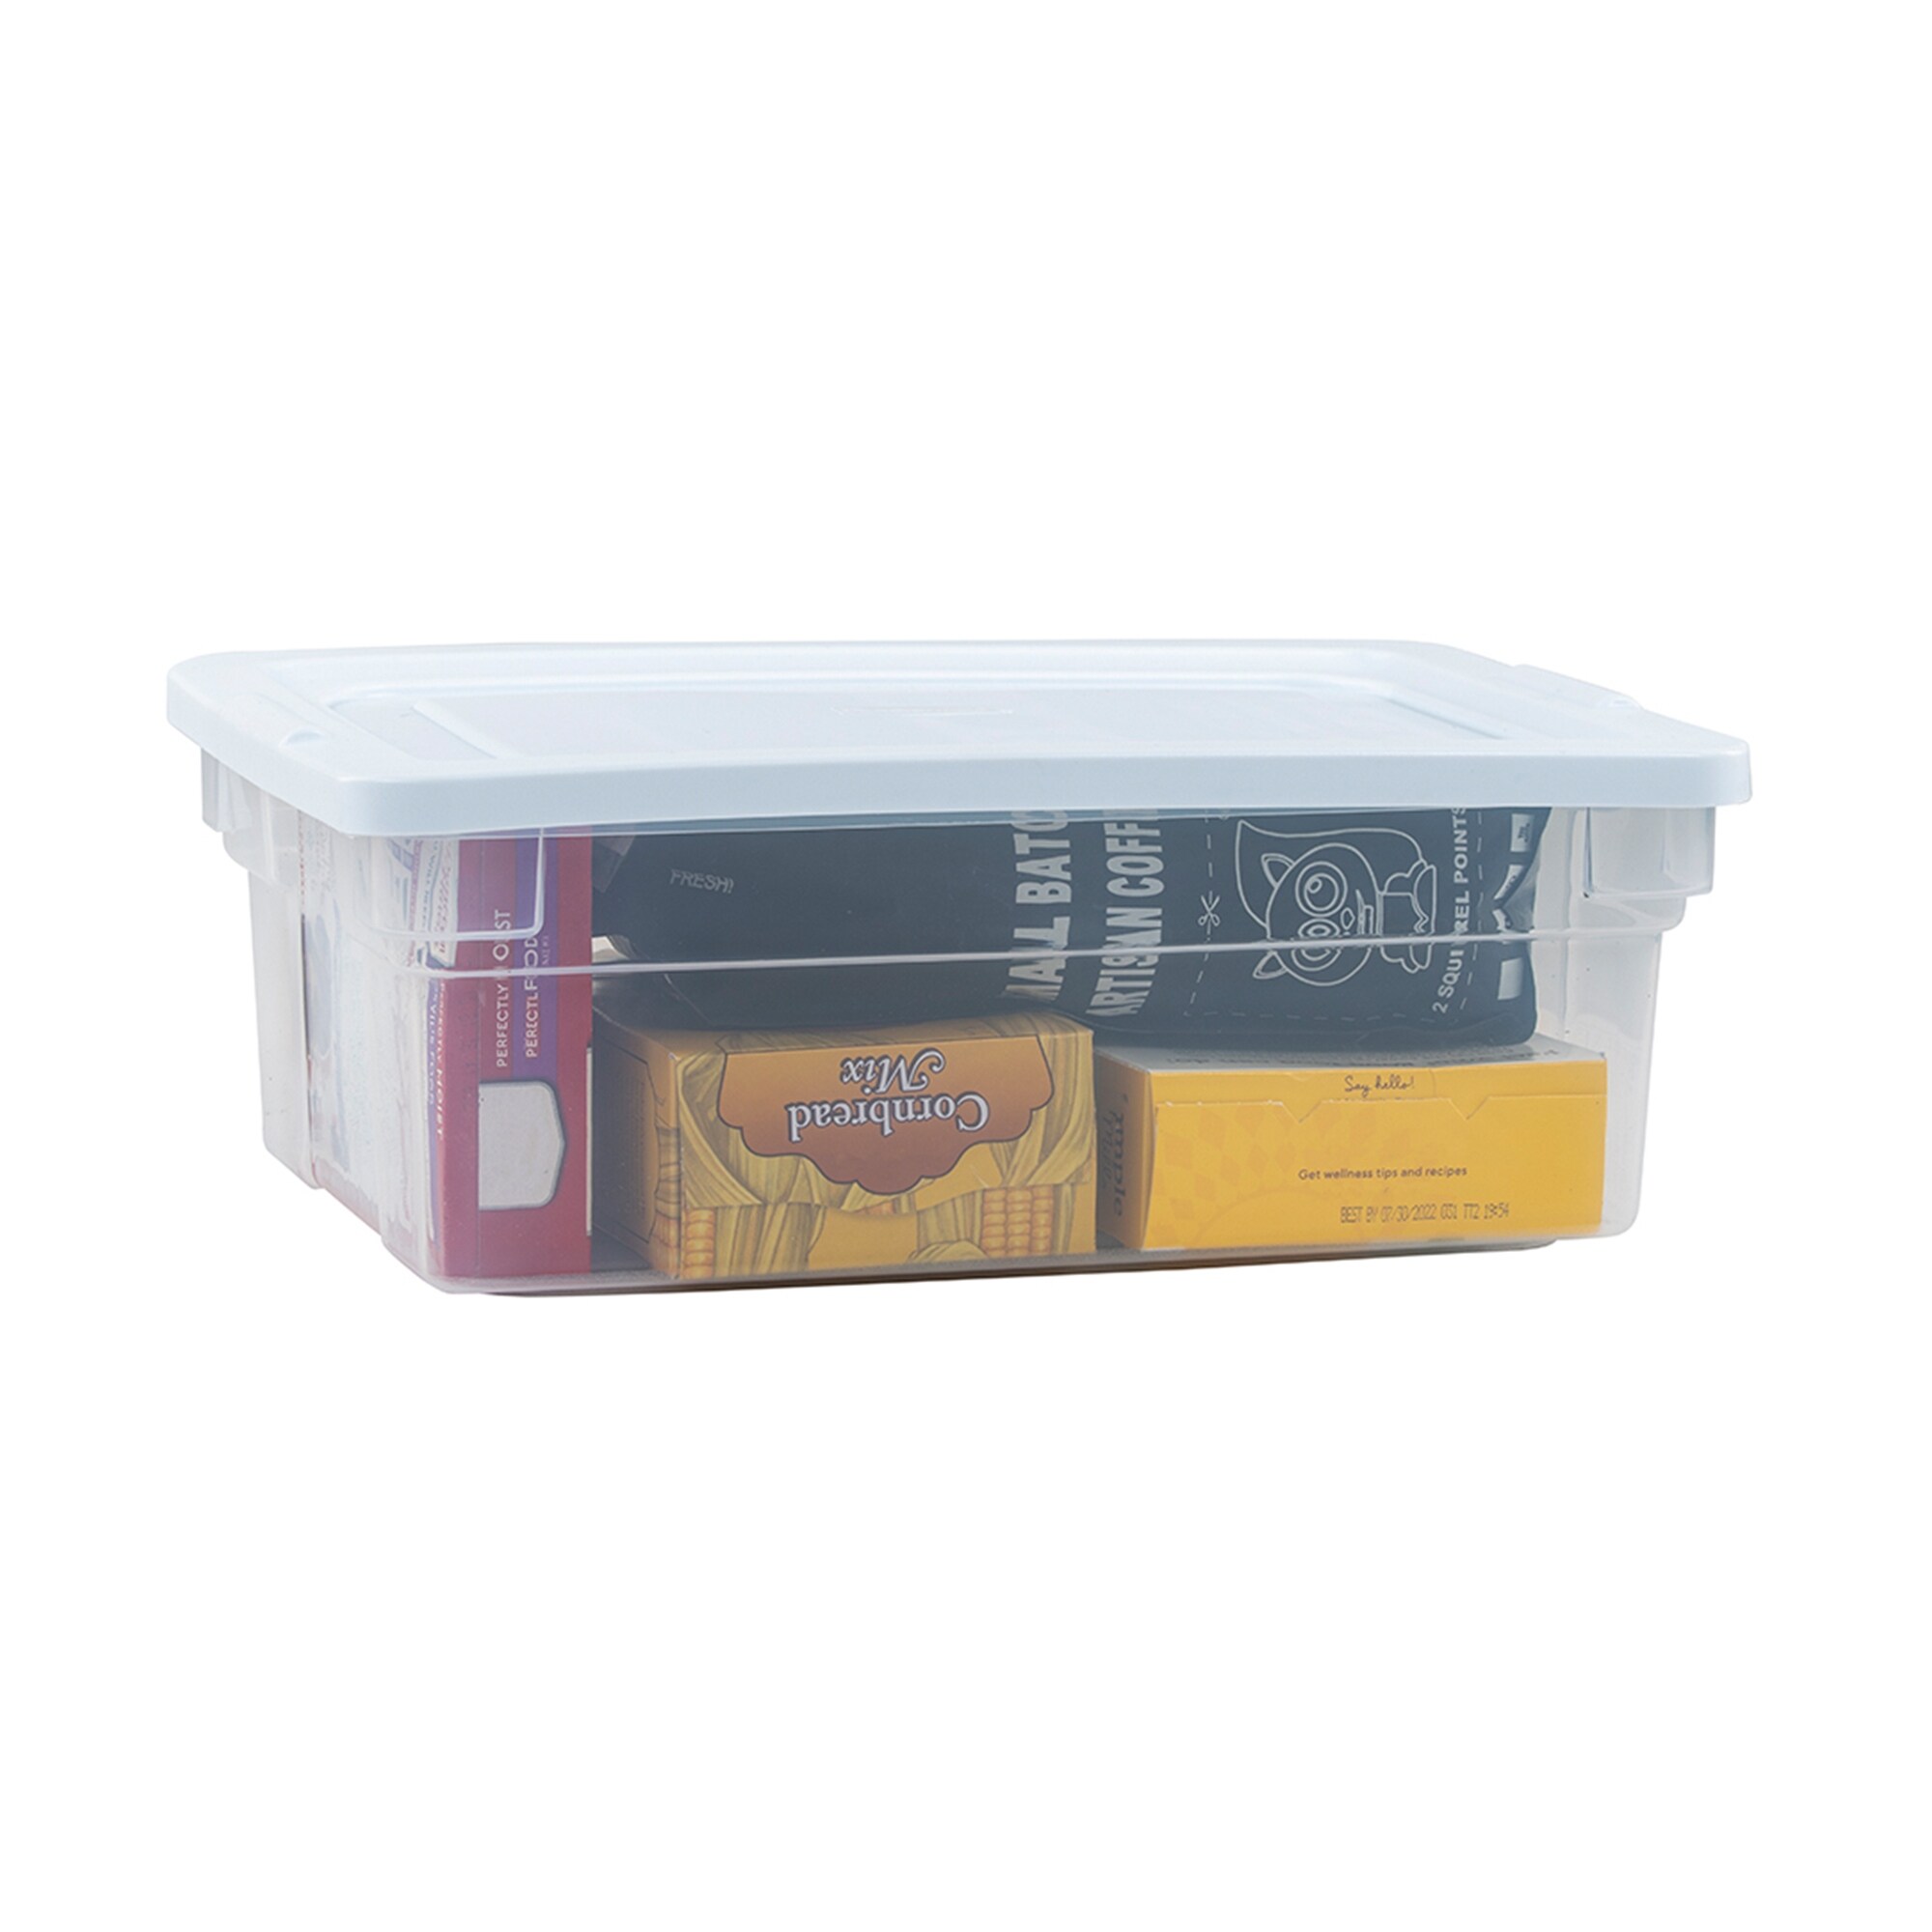 https://ak1.ostkcdn.com/images/products/is/images/direct/237dd132b0a1e86f203a45efcca1dcaec5047cab/Rubbermaid-Classic-Clear-12-Quart-Stackable-Heavy-Duty-Plastic-Storage-Bins.jpg